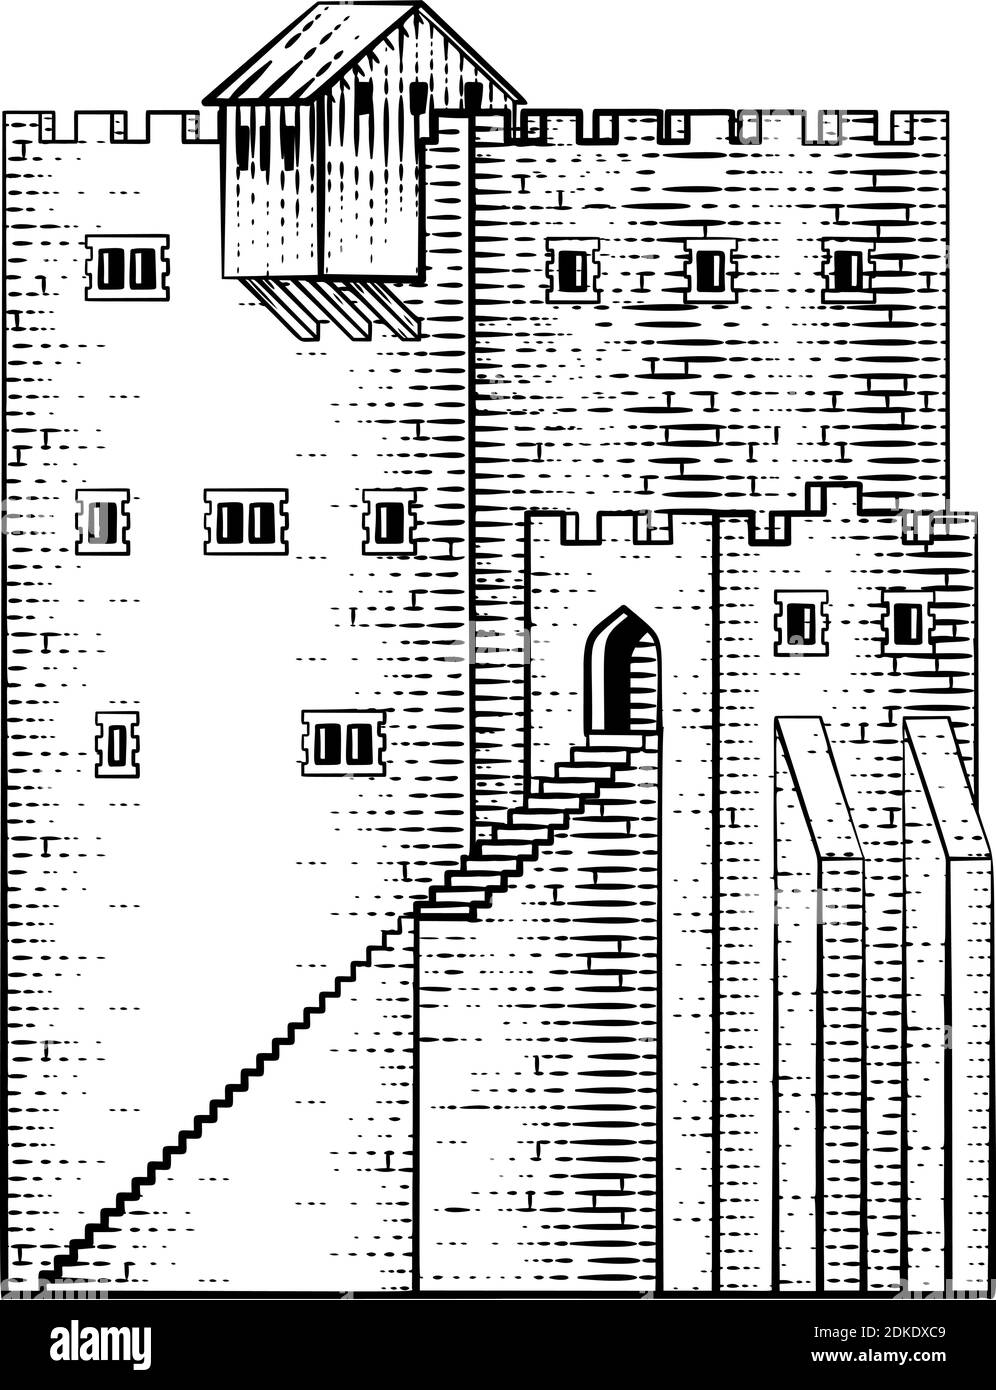 Castle Old Medieval Building Vintage Woodcut Style Stock Vector